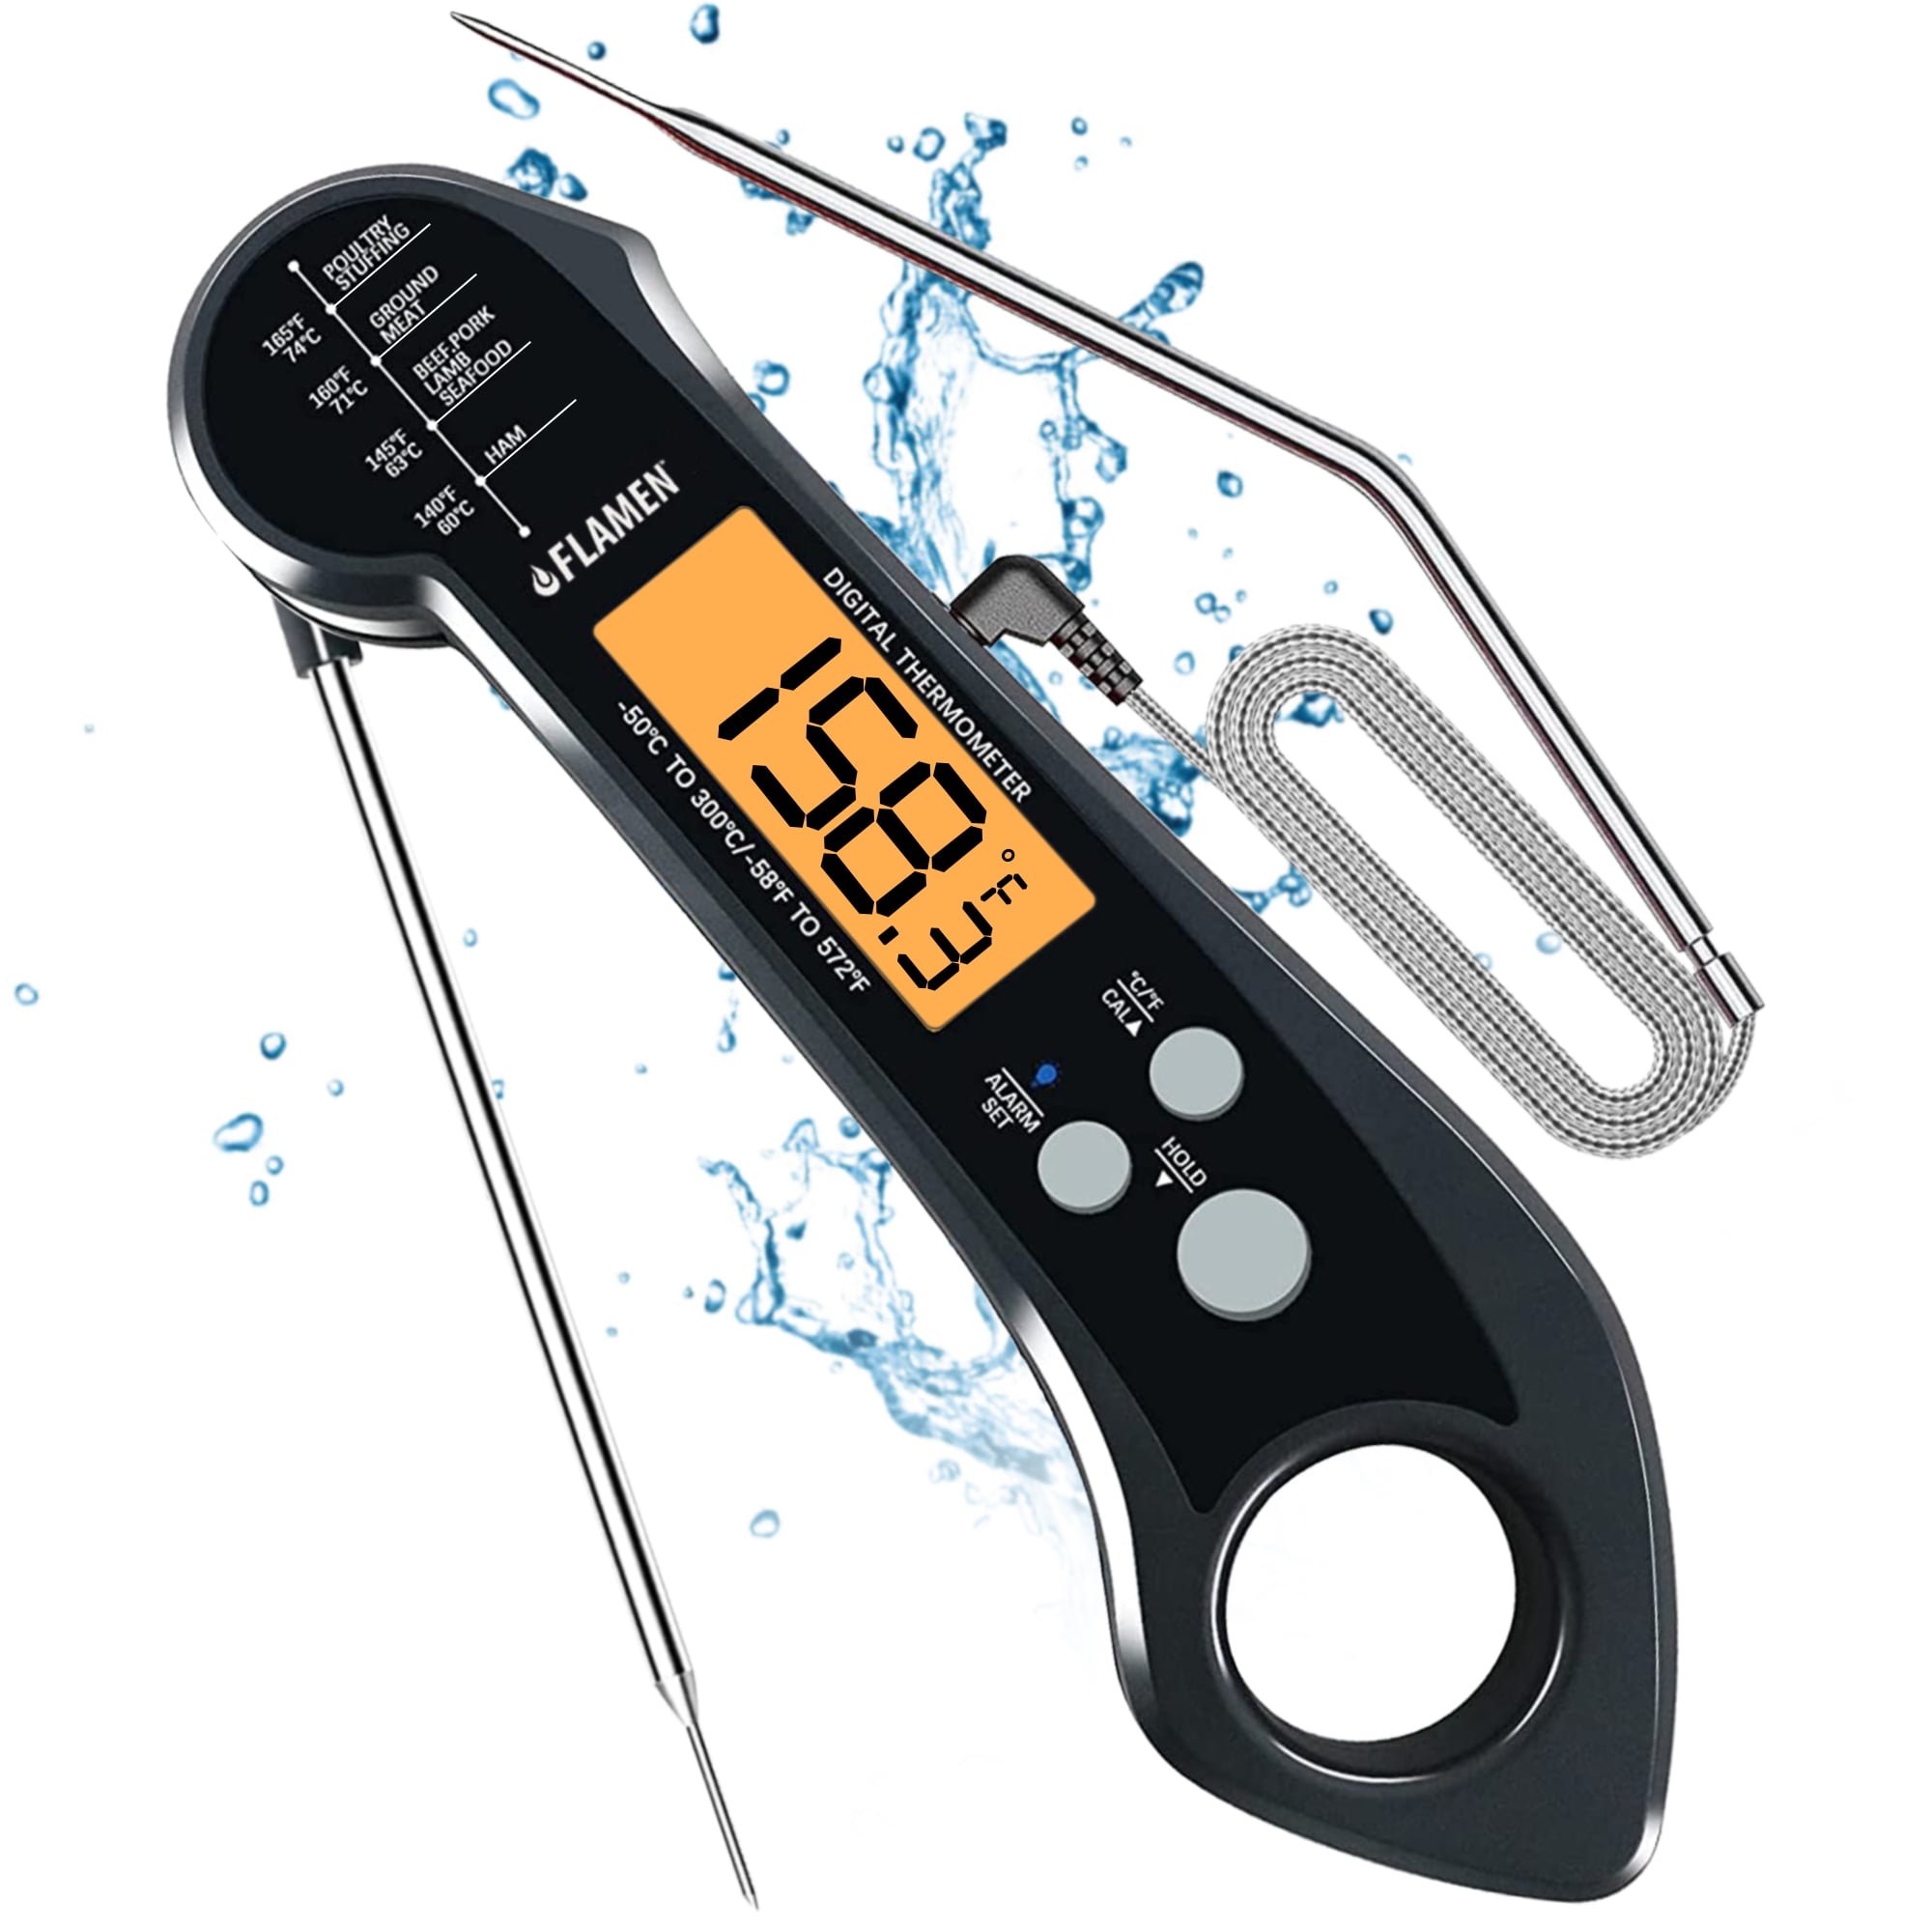  ThermoPro TP01A Digital Meat Thermometer for Cooking